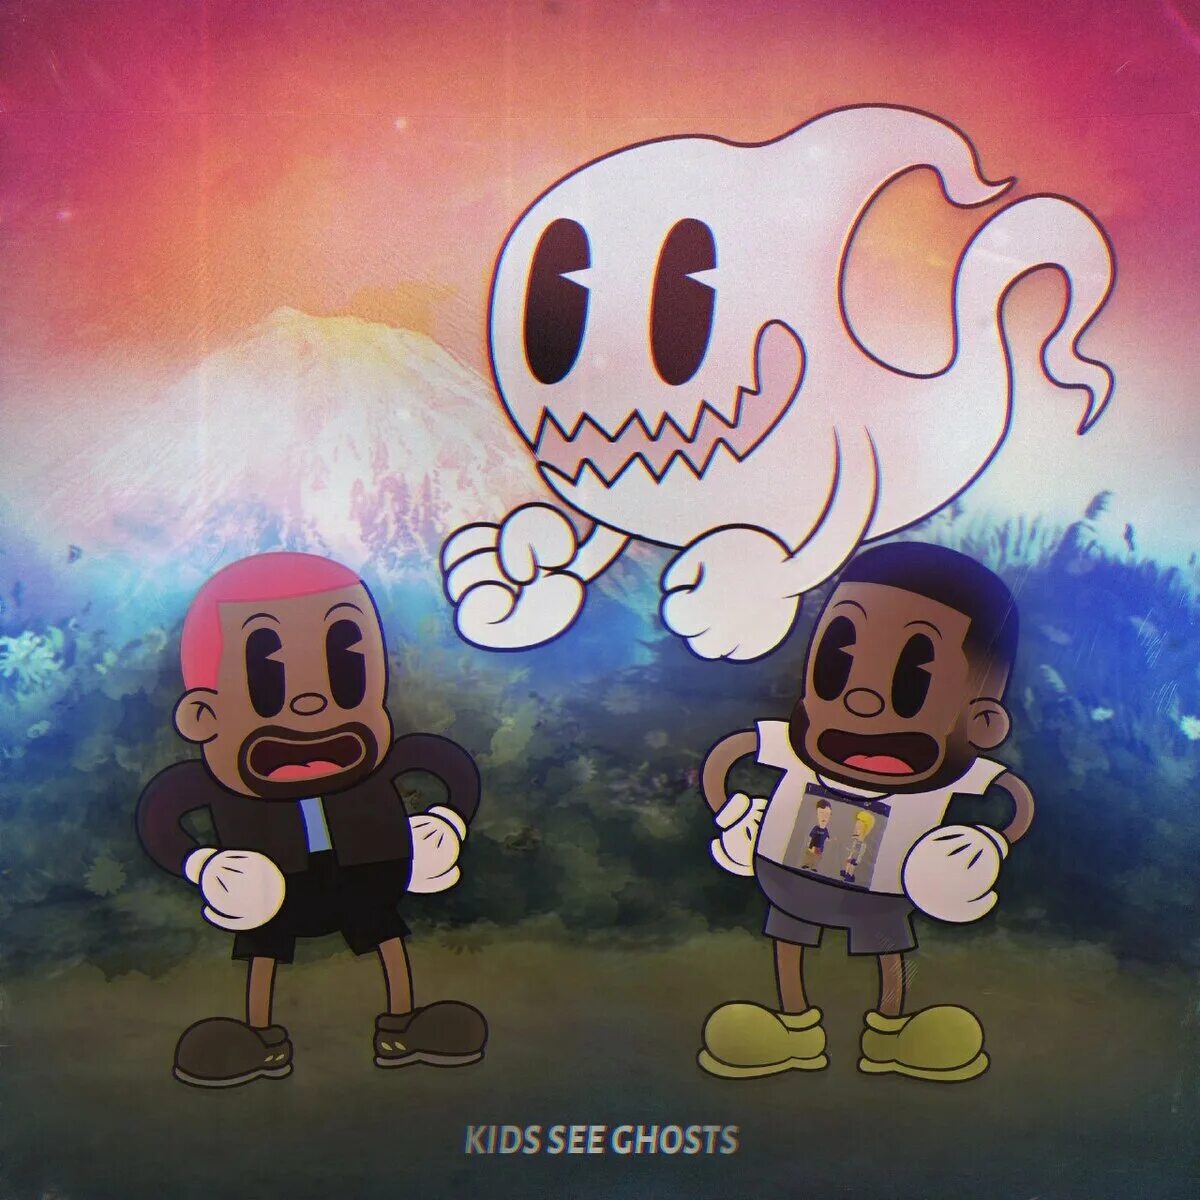 Kids see Ghosts Канье Уэст. Обложка Kanye West Kids see Ghost. Kanye West Kid Cudi Kids see Ghosts. Kids see Ghosts обложка. Kanye west kids